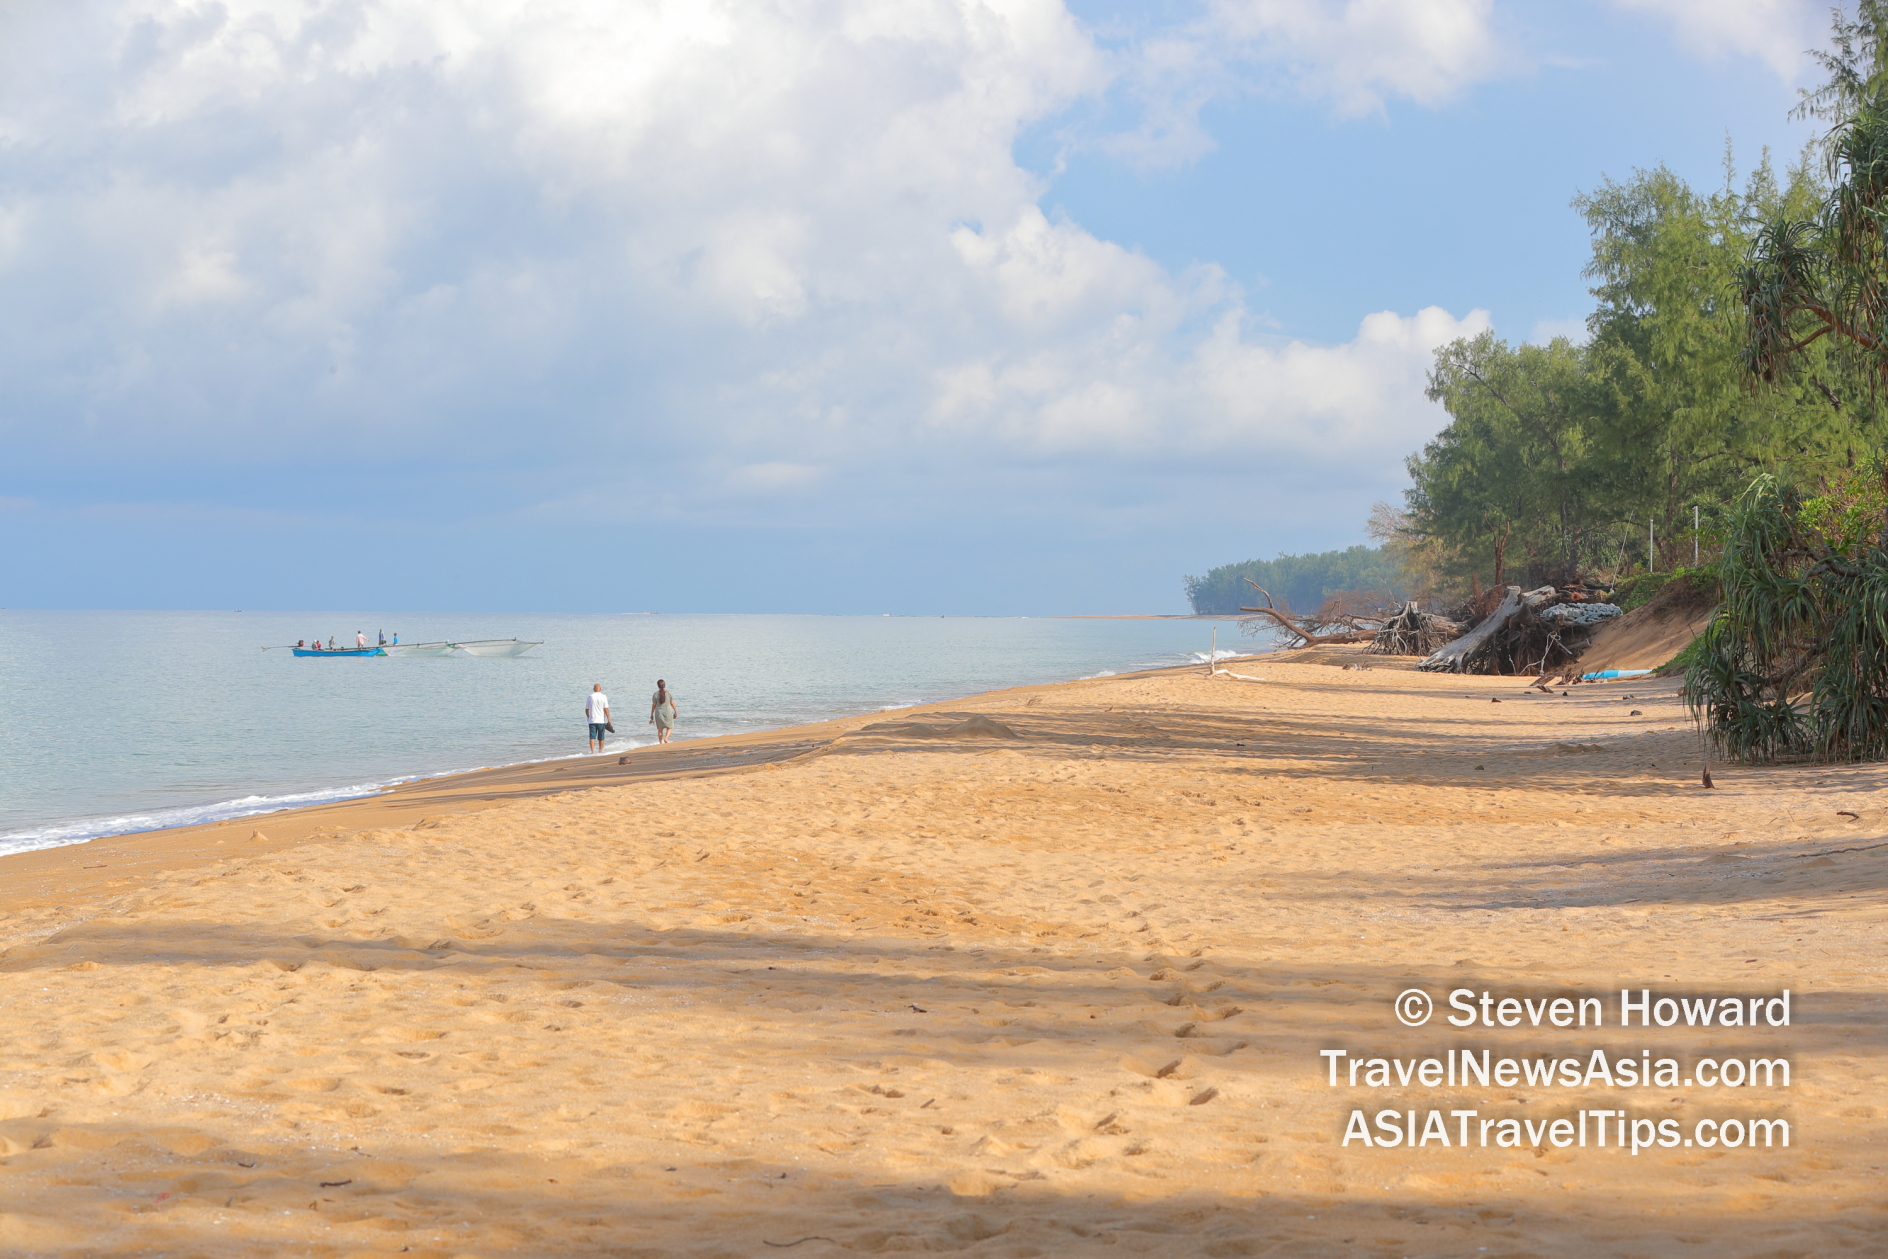 Beach in Phuket, Thailand. Picture by Steven Howard of TravelNewsAsia.com Click to enlarge.